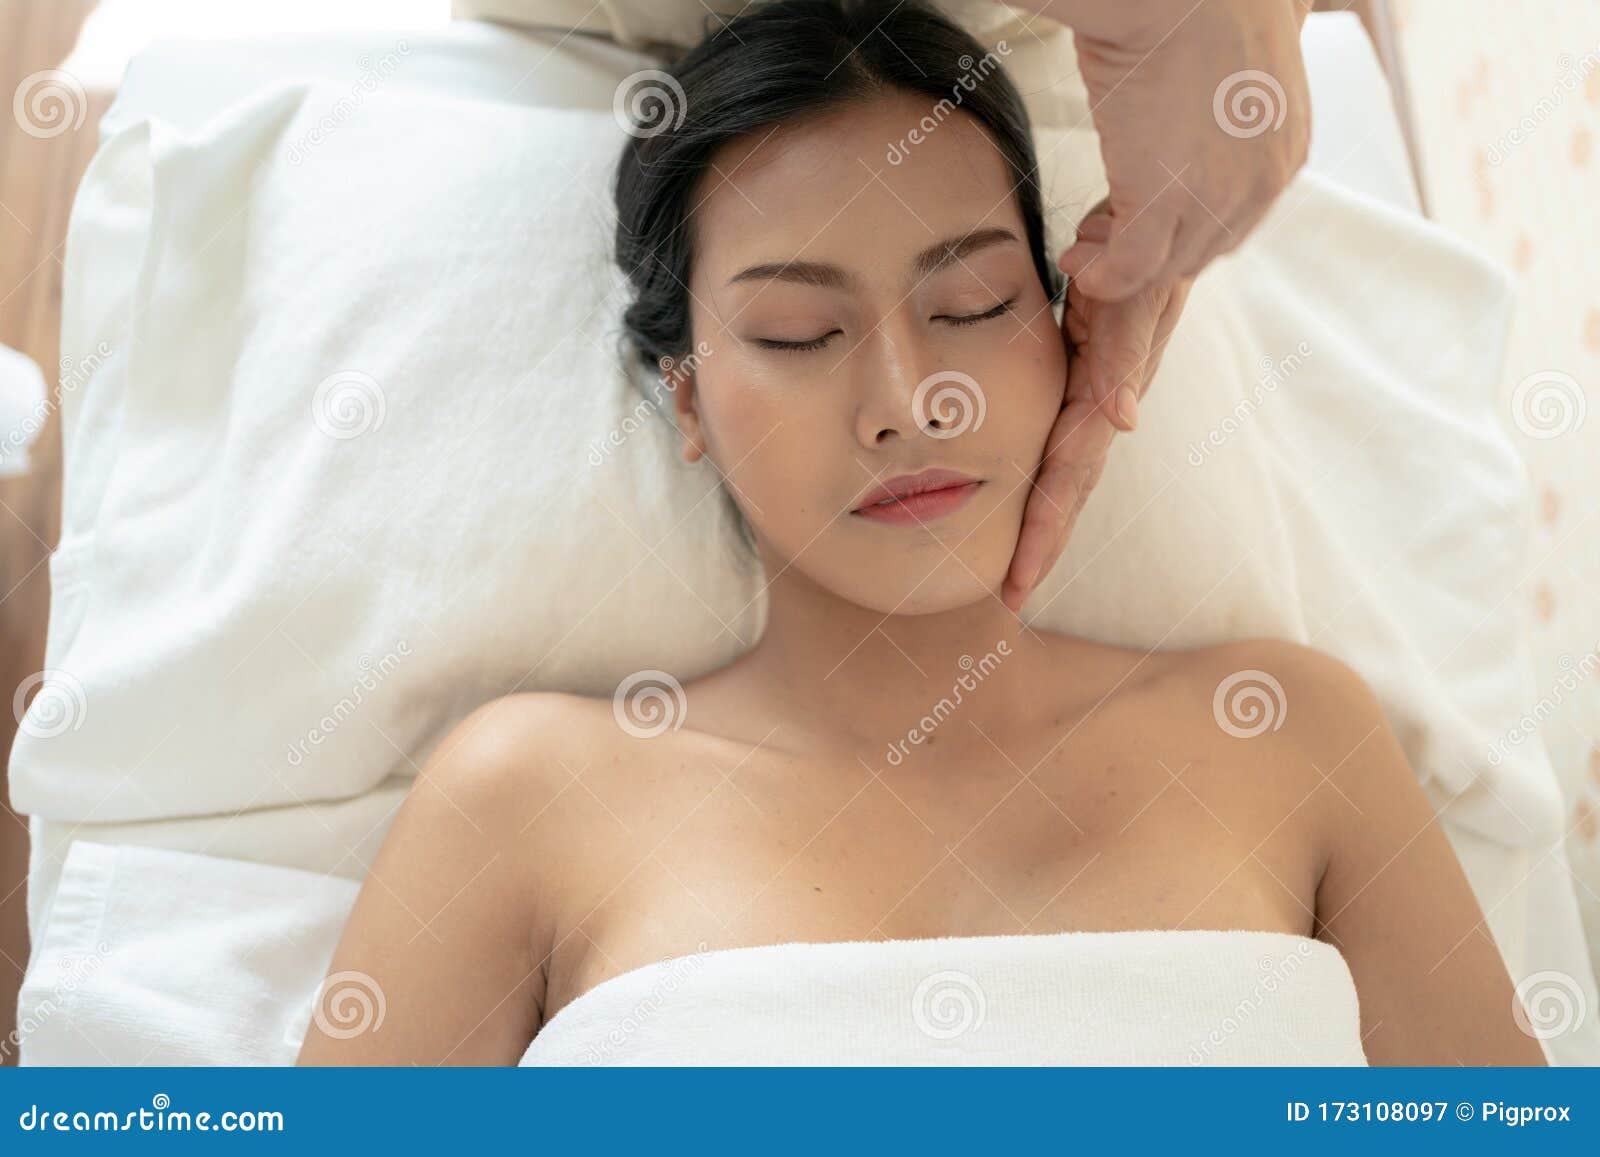 Young Woman During Spa Salon Body Massage Hands Treatment Stock Image Image Of Facial Lying